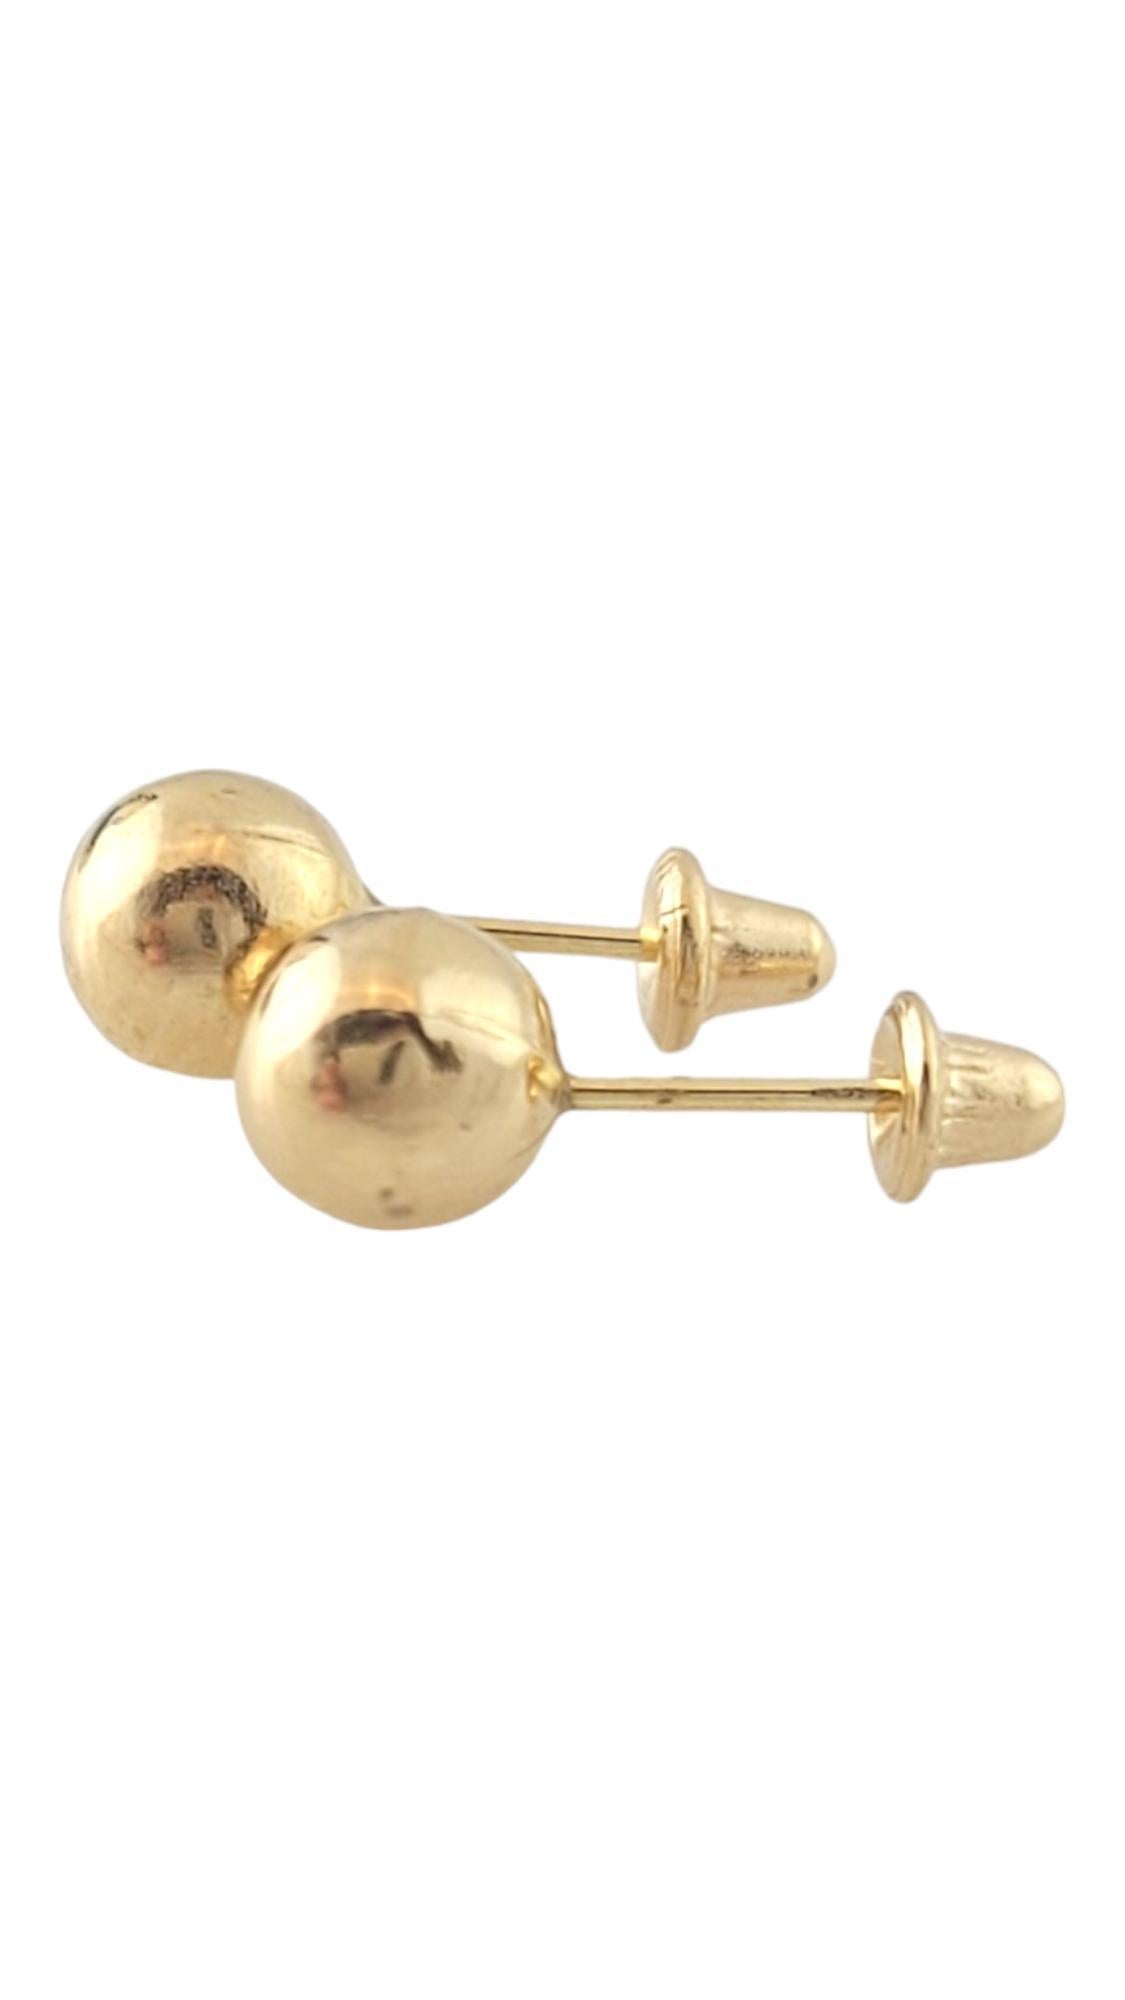 Vintage 10K Yellow Gold Ball Stud Earrings

This classic set of 10K yellow gold ball stud earrings are going to look gorgeous on anybody!

Size: 5.0mm X 5.0mm X 5.0mm

Weight: 0.1 dwt/ 0.3 g

Tested 10K

Very good condition, professionally